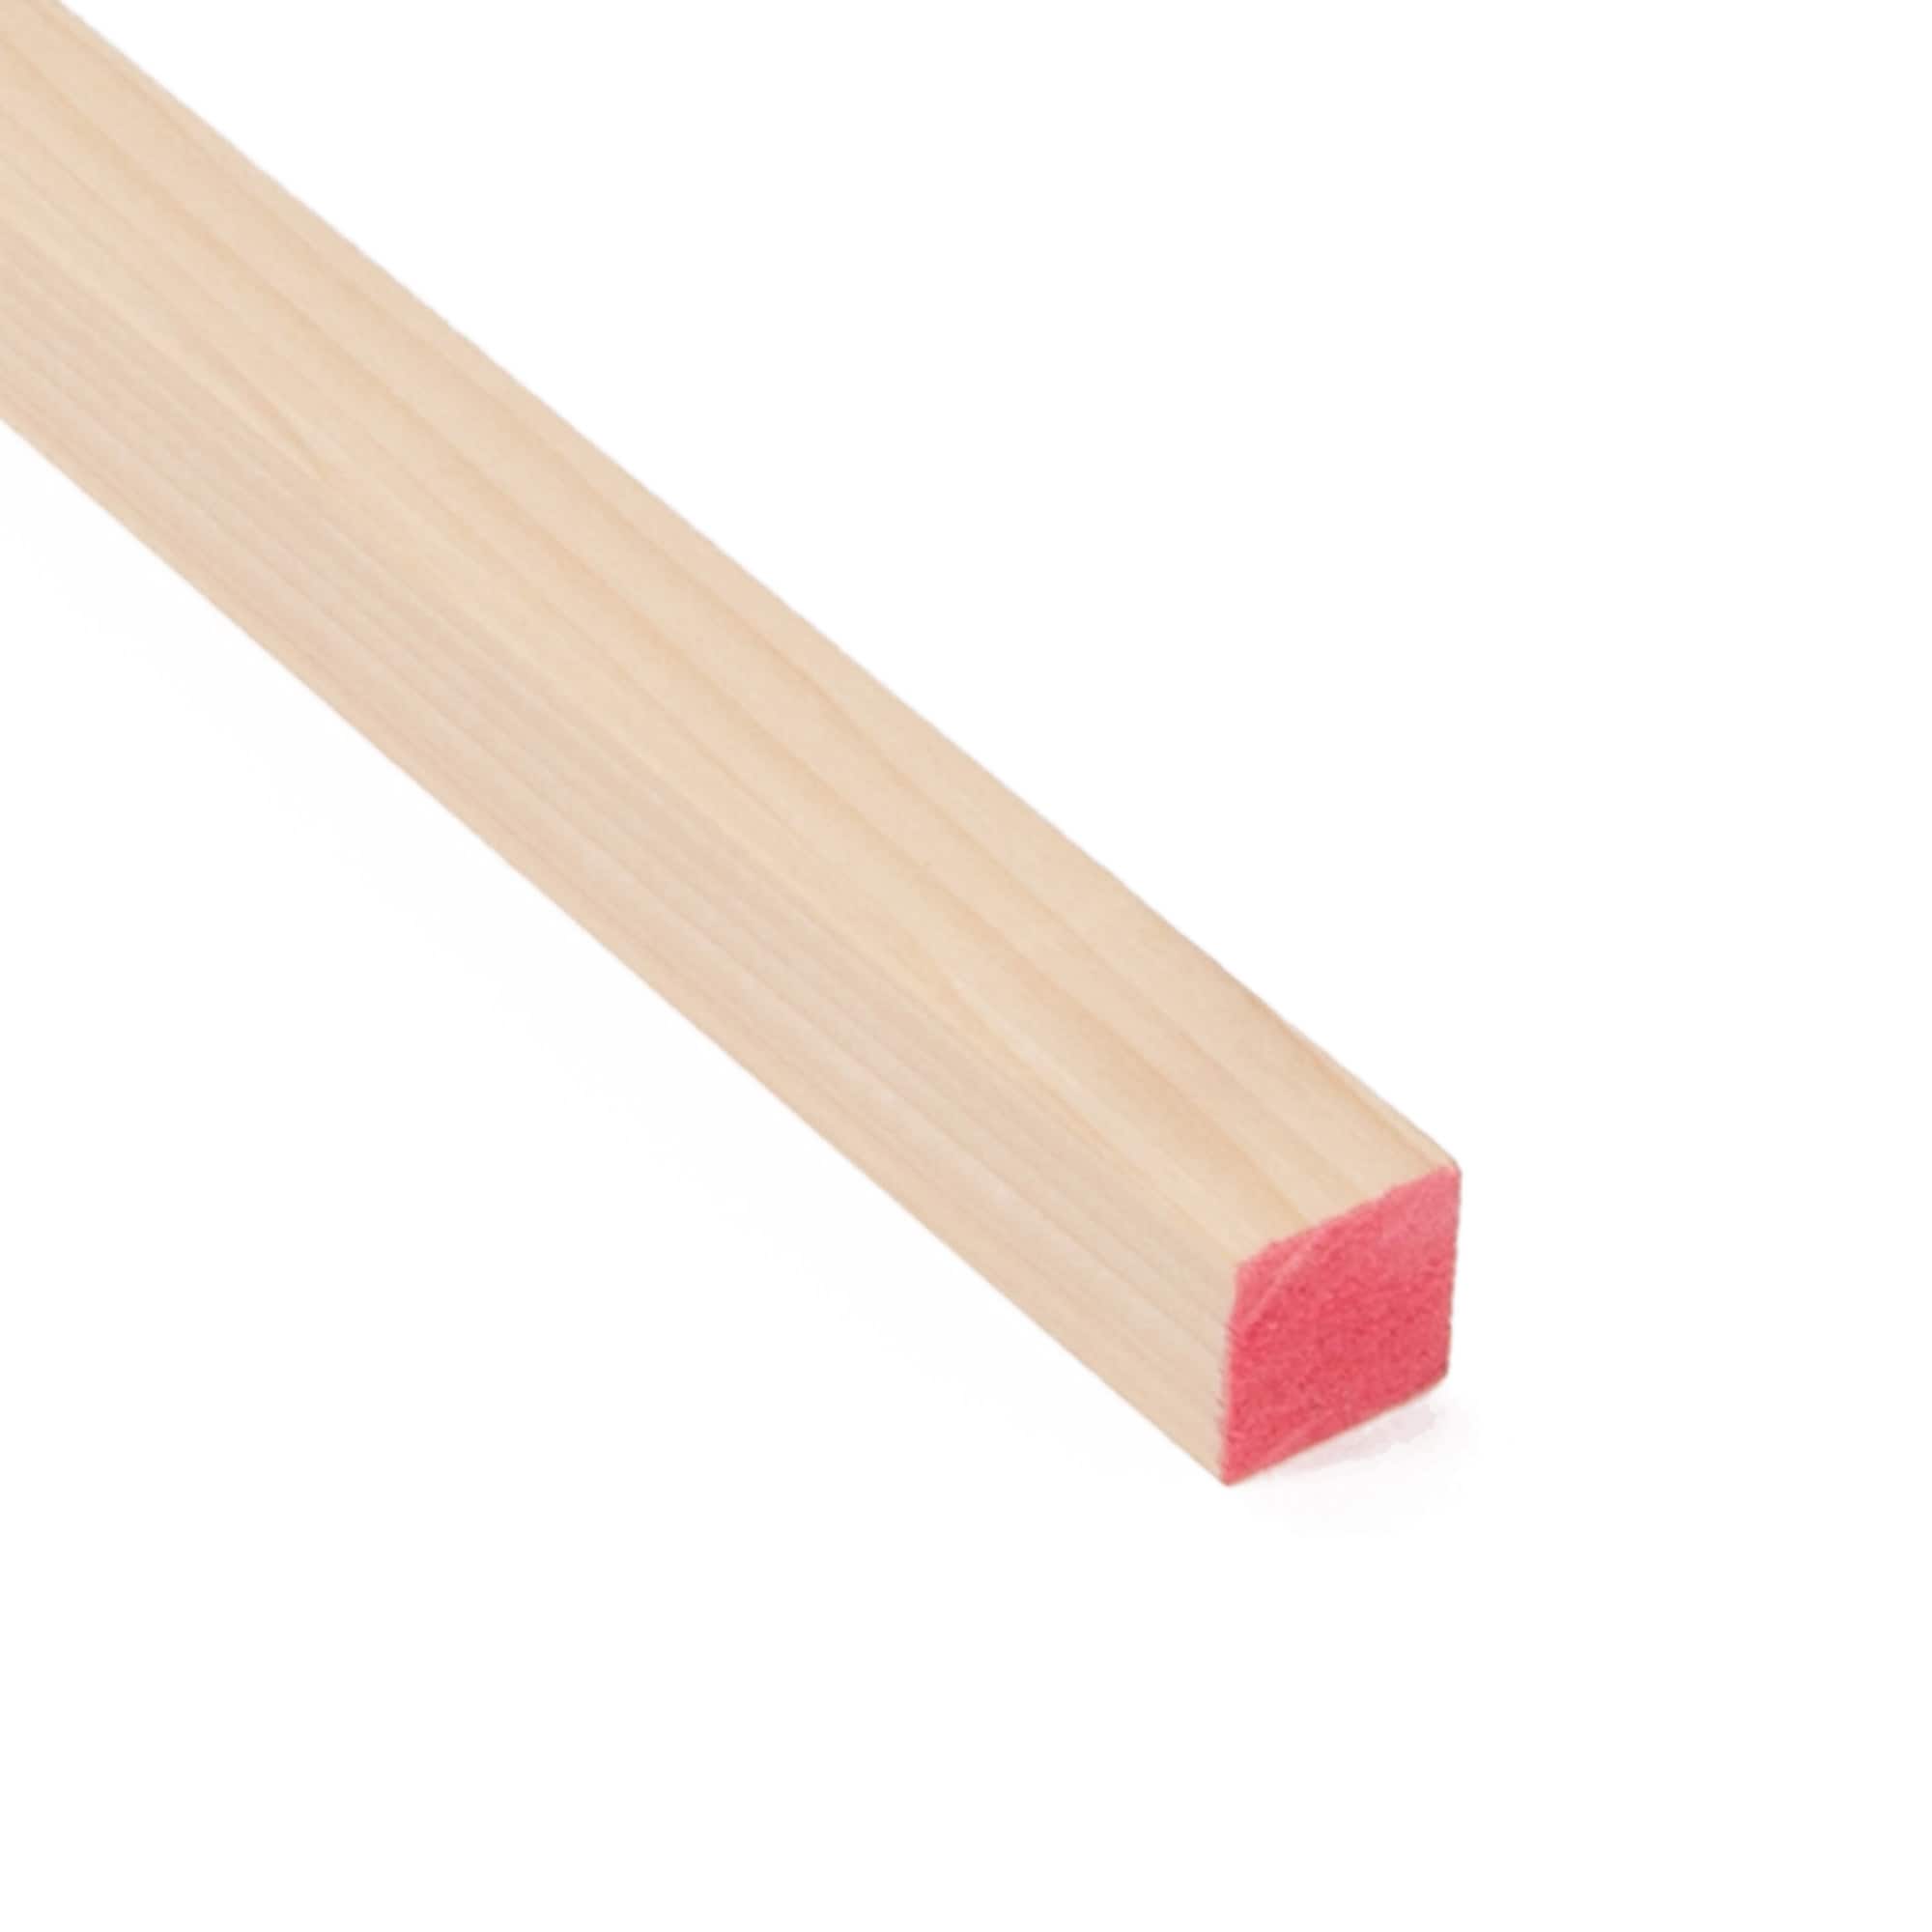 Hardwood Square Dowel - 36 in. x 1 in. - Sanded and Ready for Finishing -  Versatile Wooden Rod for DIY Home Projects